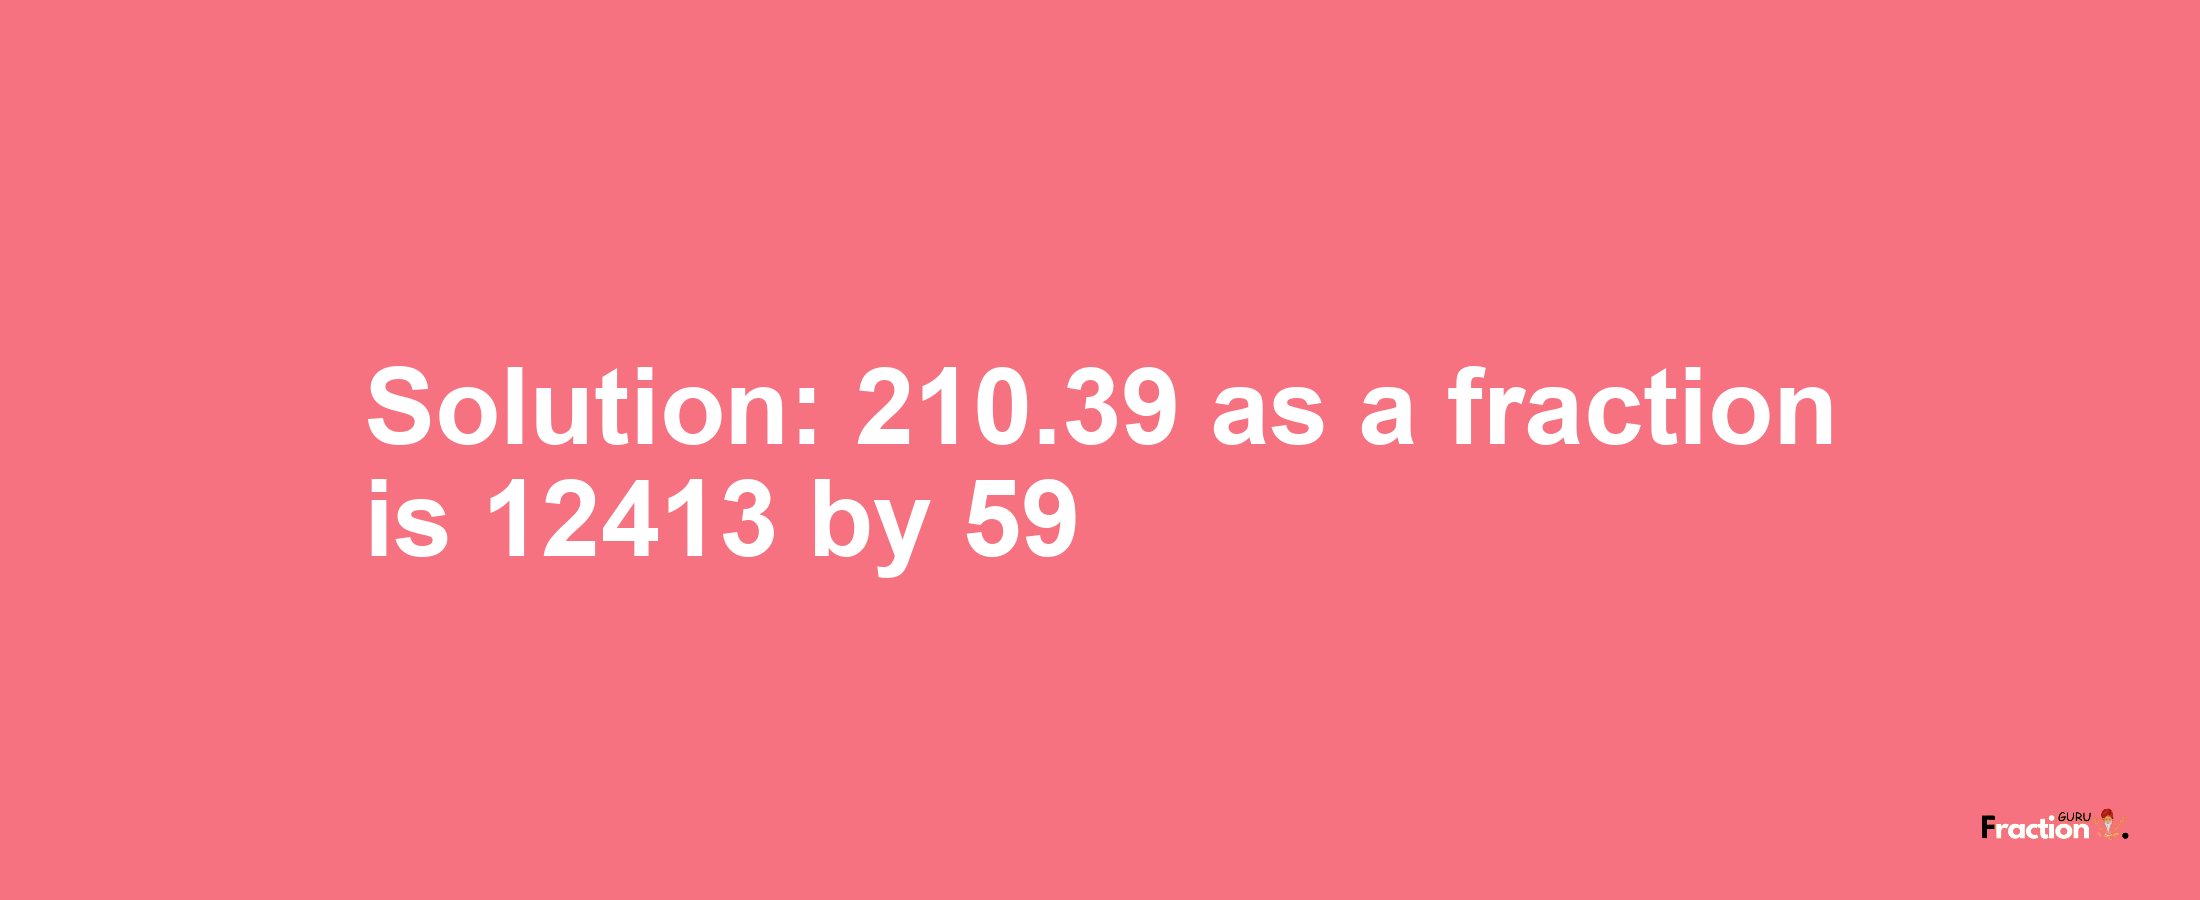 Solution:210.39 as a fraction is 12413/59